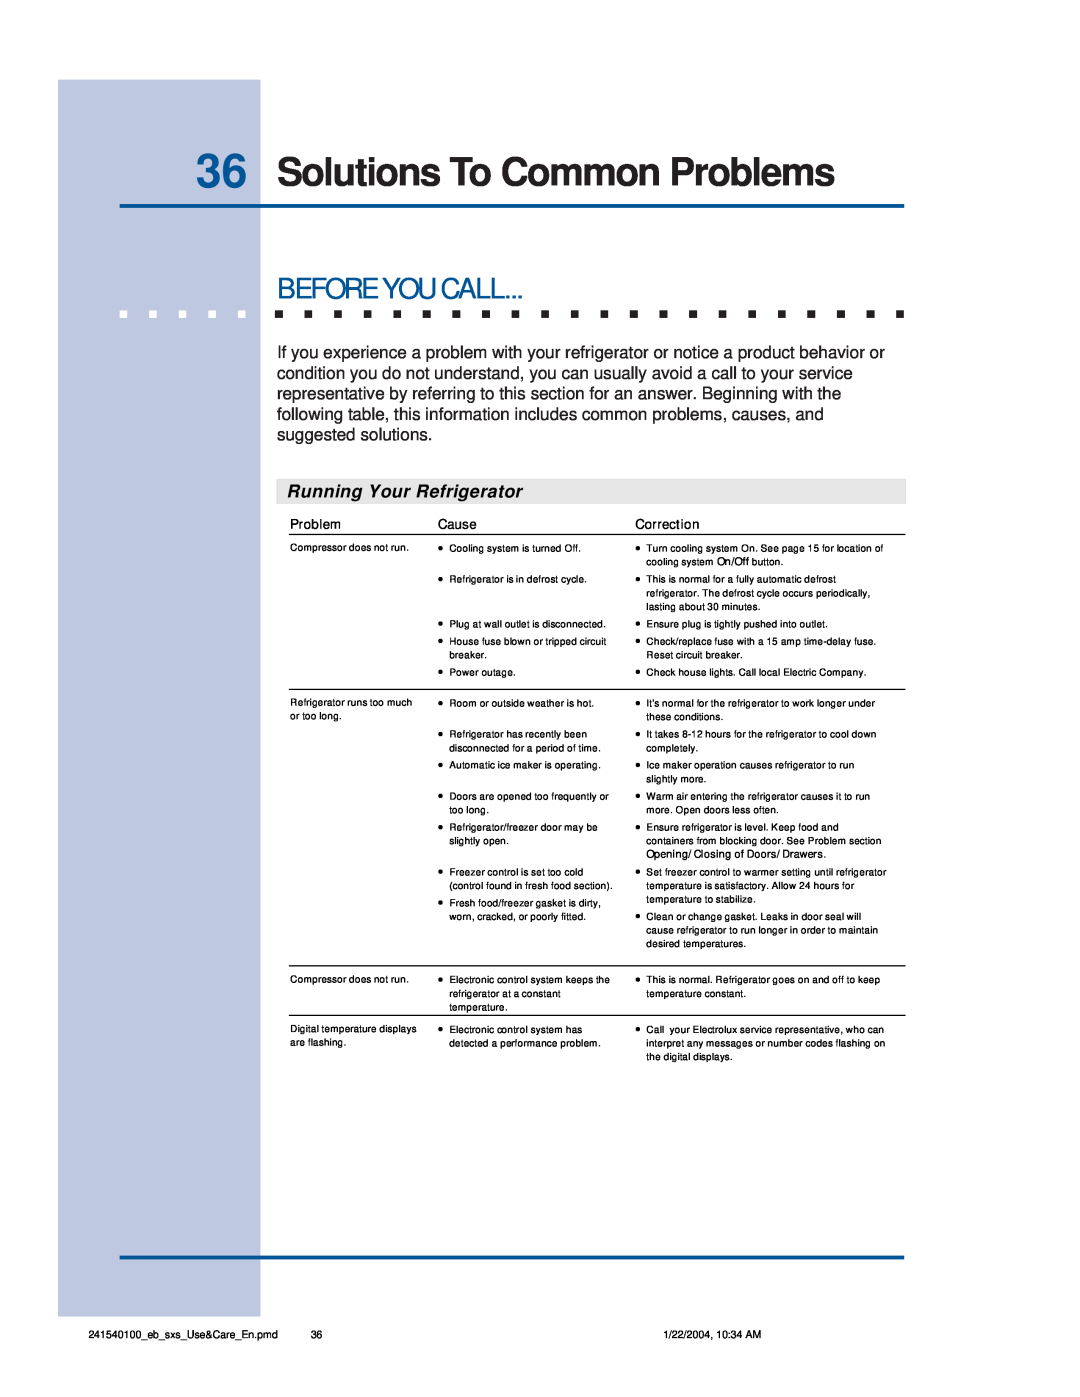 Frigidaire 241540100 (1203) 36Solutions To Common Problems, Before You Call, Running Your Refrigerator, Cause, Correction 